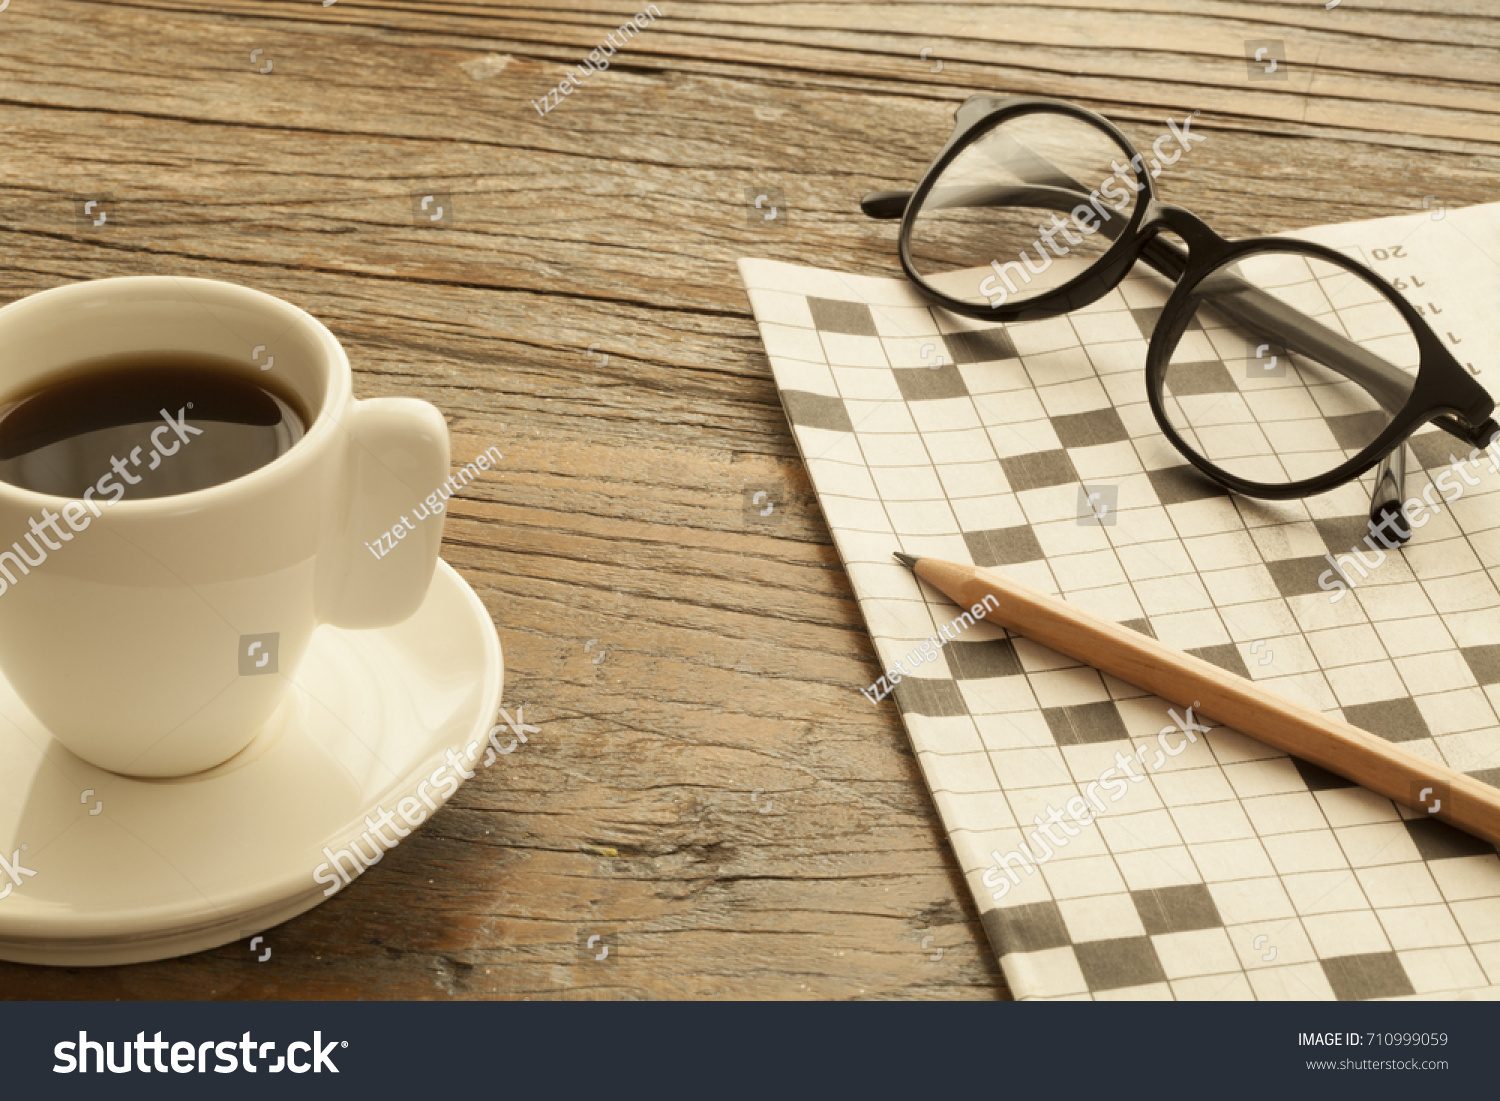 Stock Photo Crossword At Newspaper With Coffee 710999059 